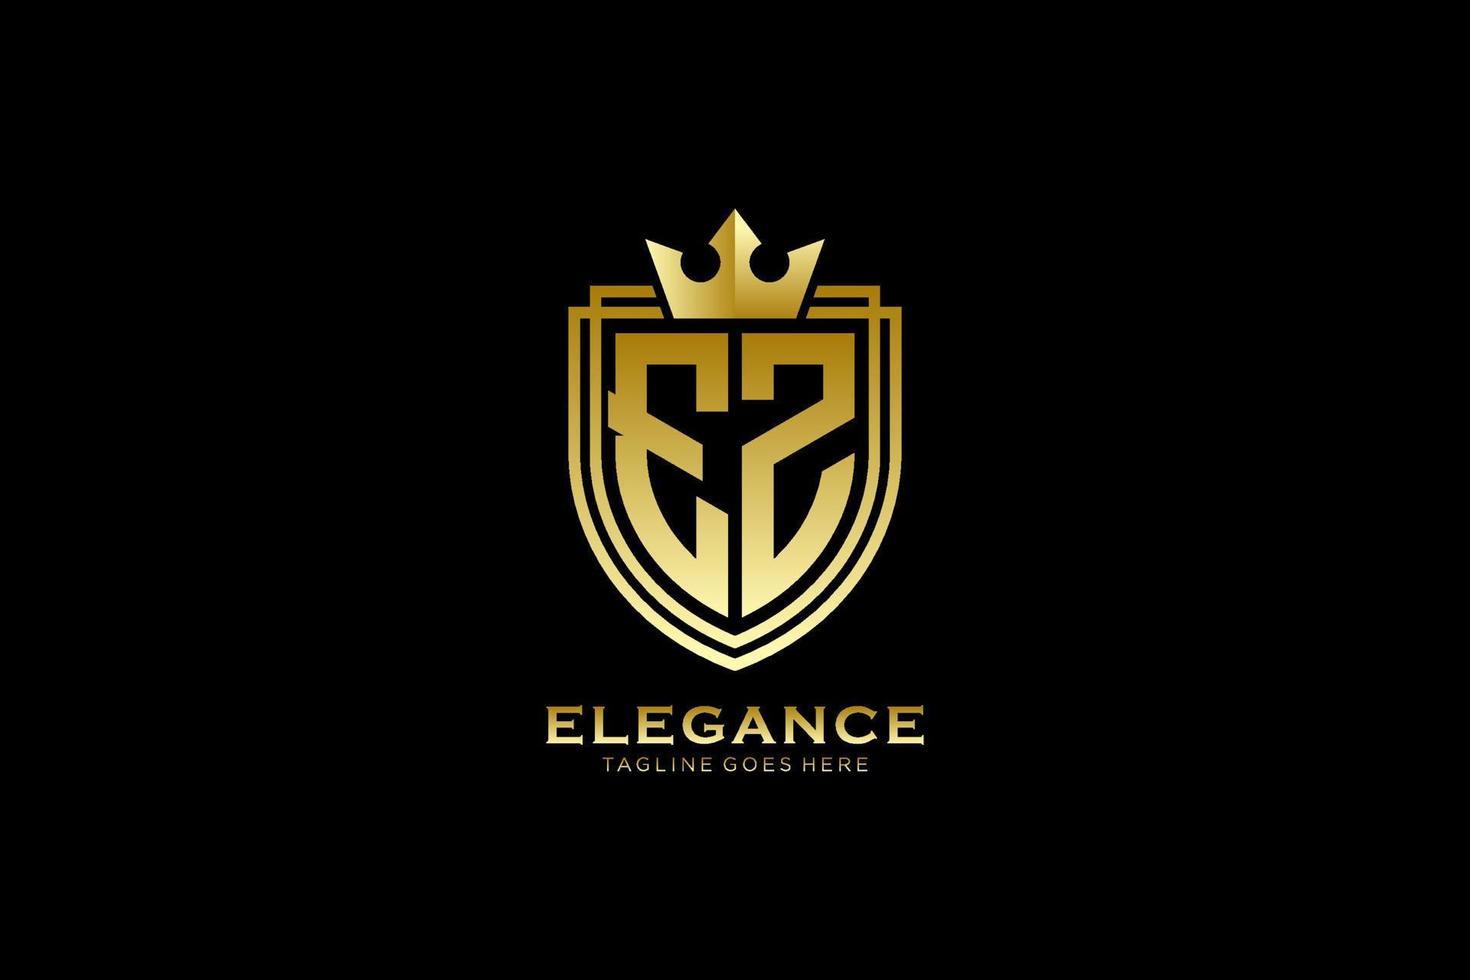 initial EZ elegant luxury monogram logo or badge template with scrolls and royal crown - perfect for luxurious branding projects vector